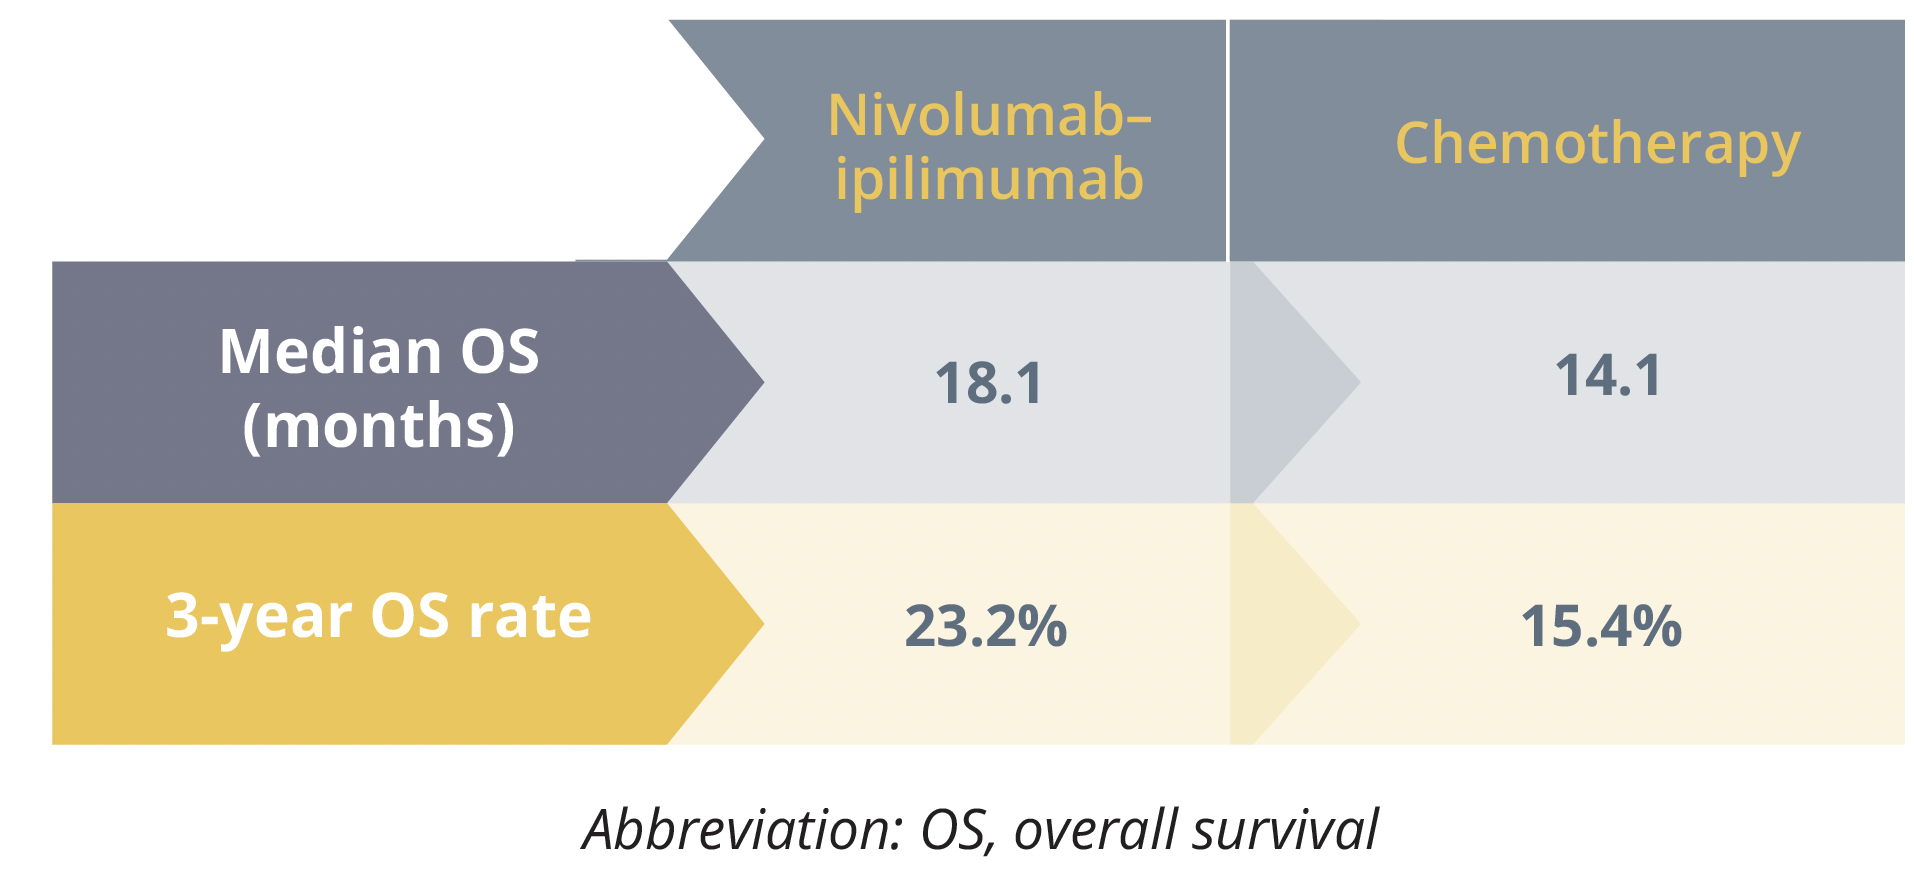 Median and 3-year overall survival results in favour of nivolumab plus ipilimumab versus chemotherapy